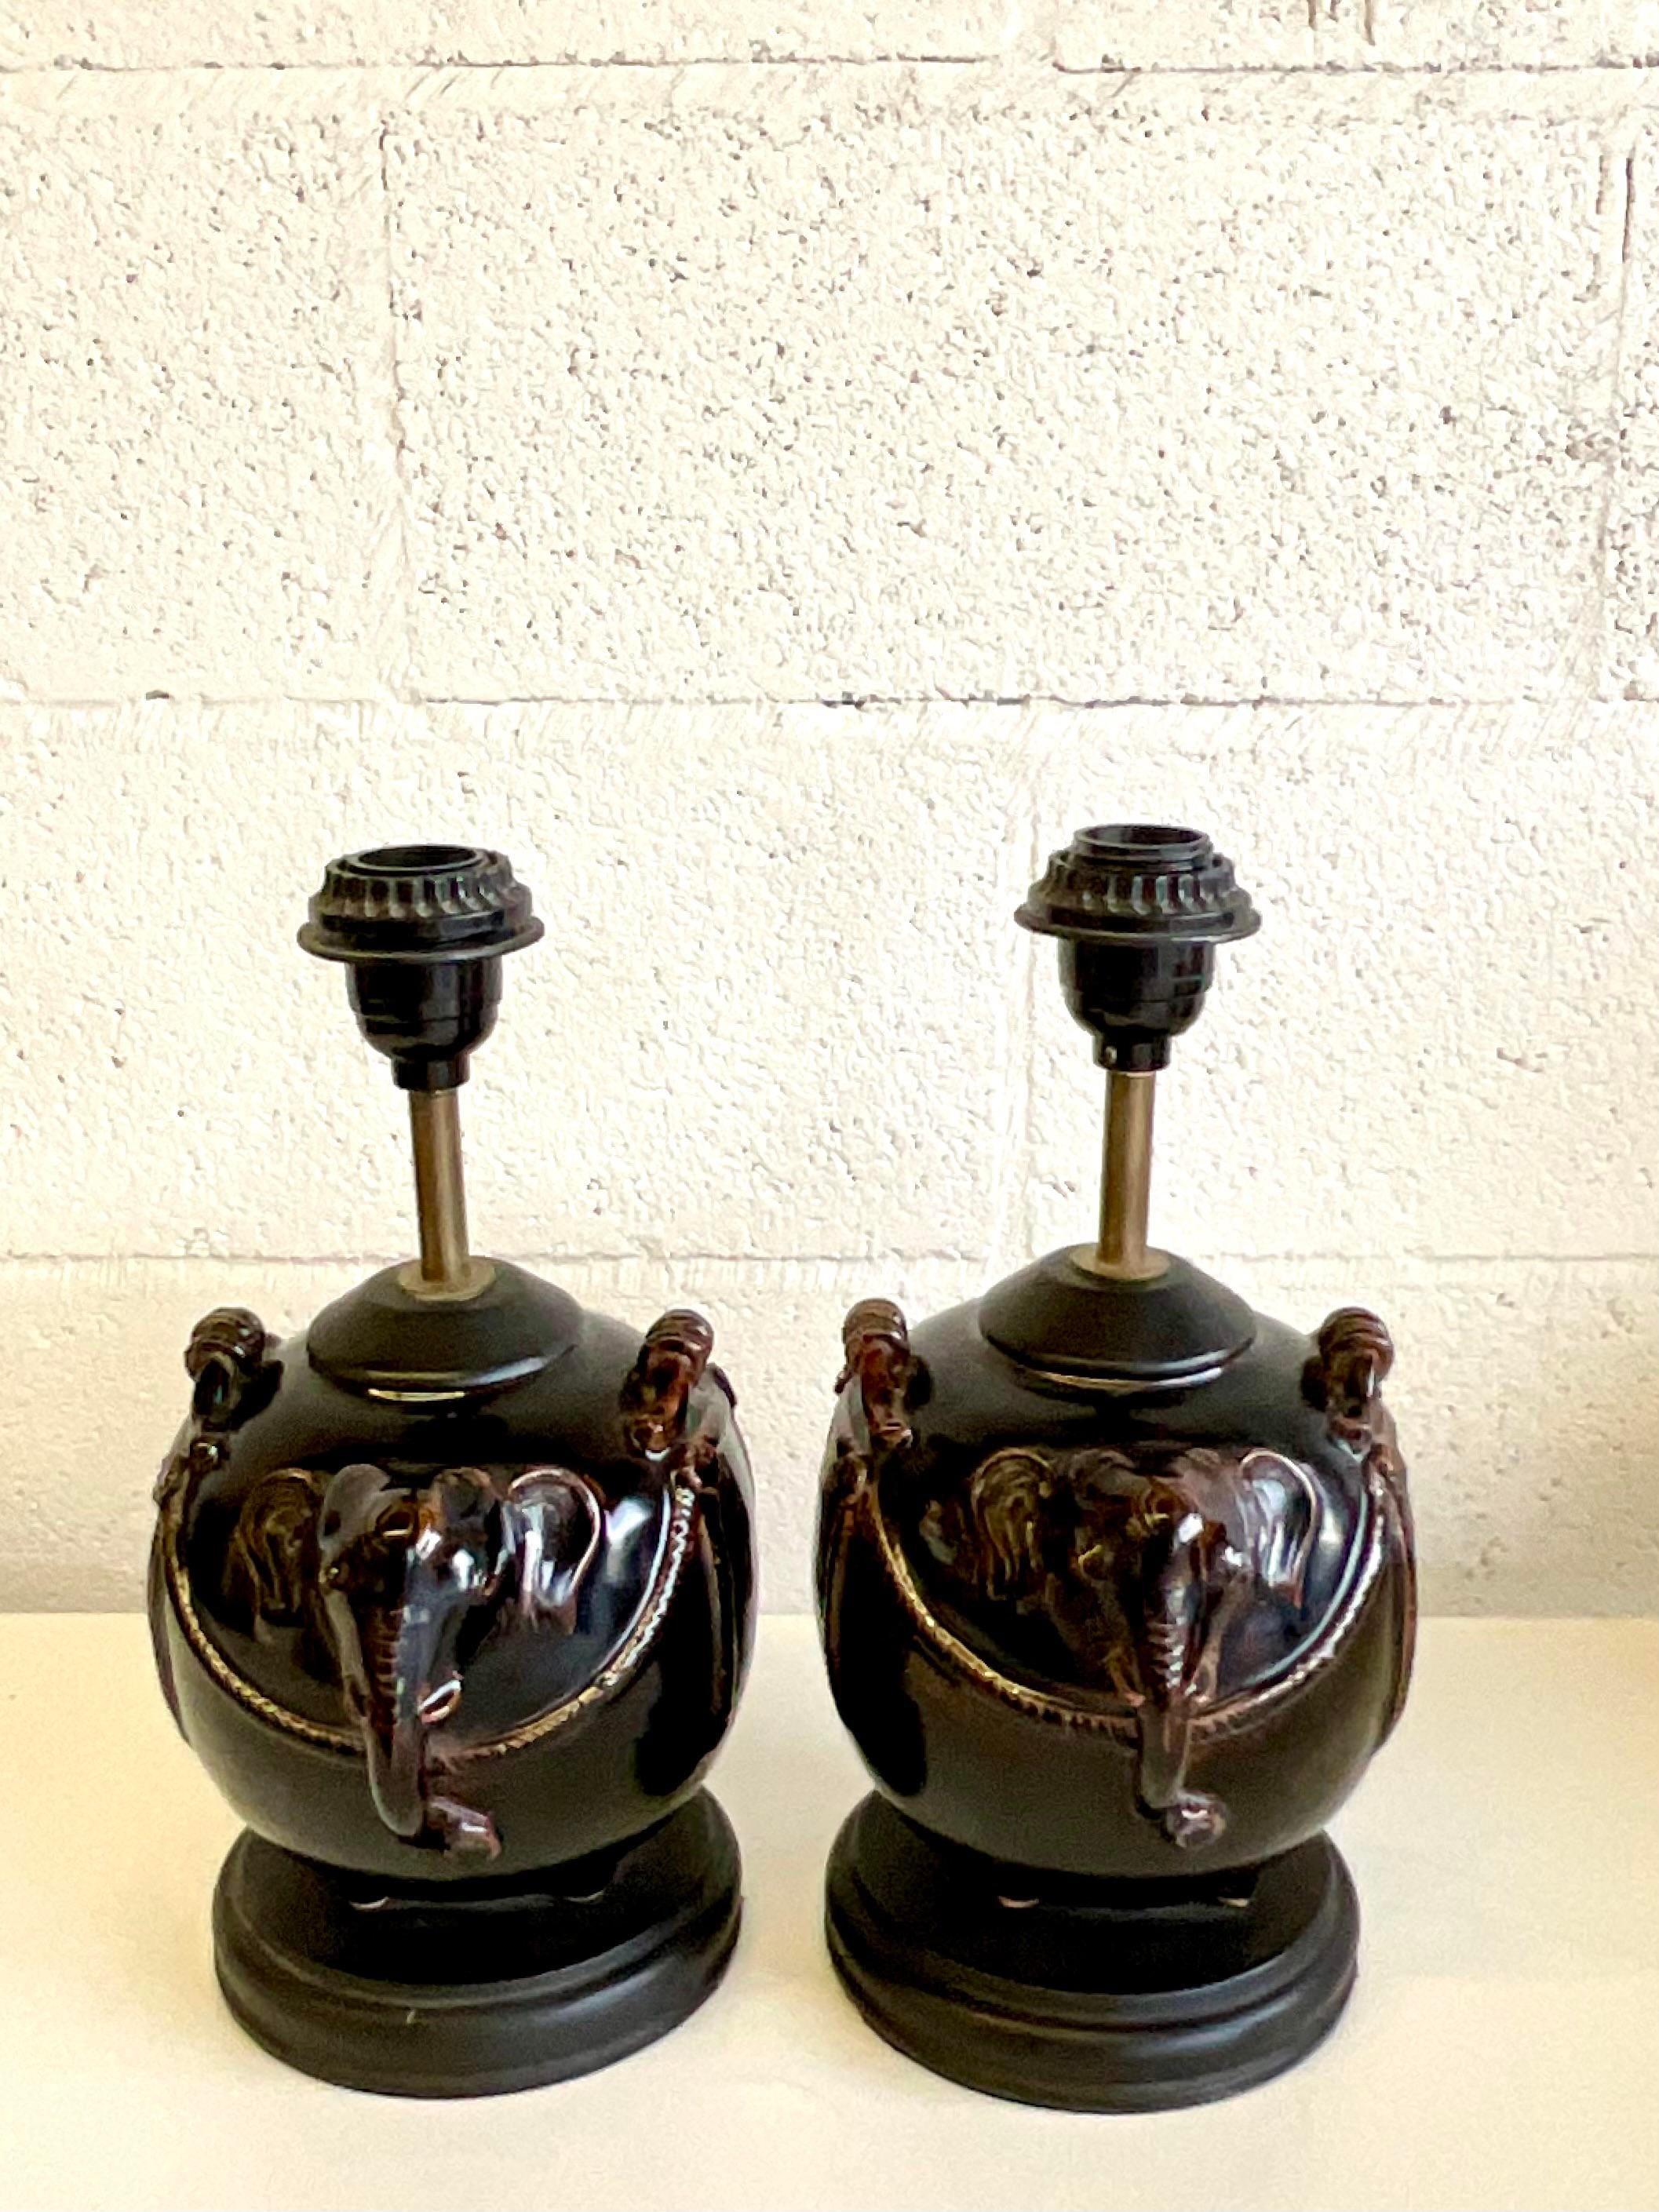 Fantastic pair of vintage glazed ceramic lamps. A charming elephant design in a deep rich brown. Acquired from a Palm Beach estate.